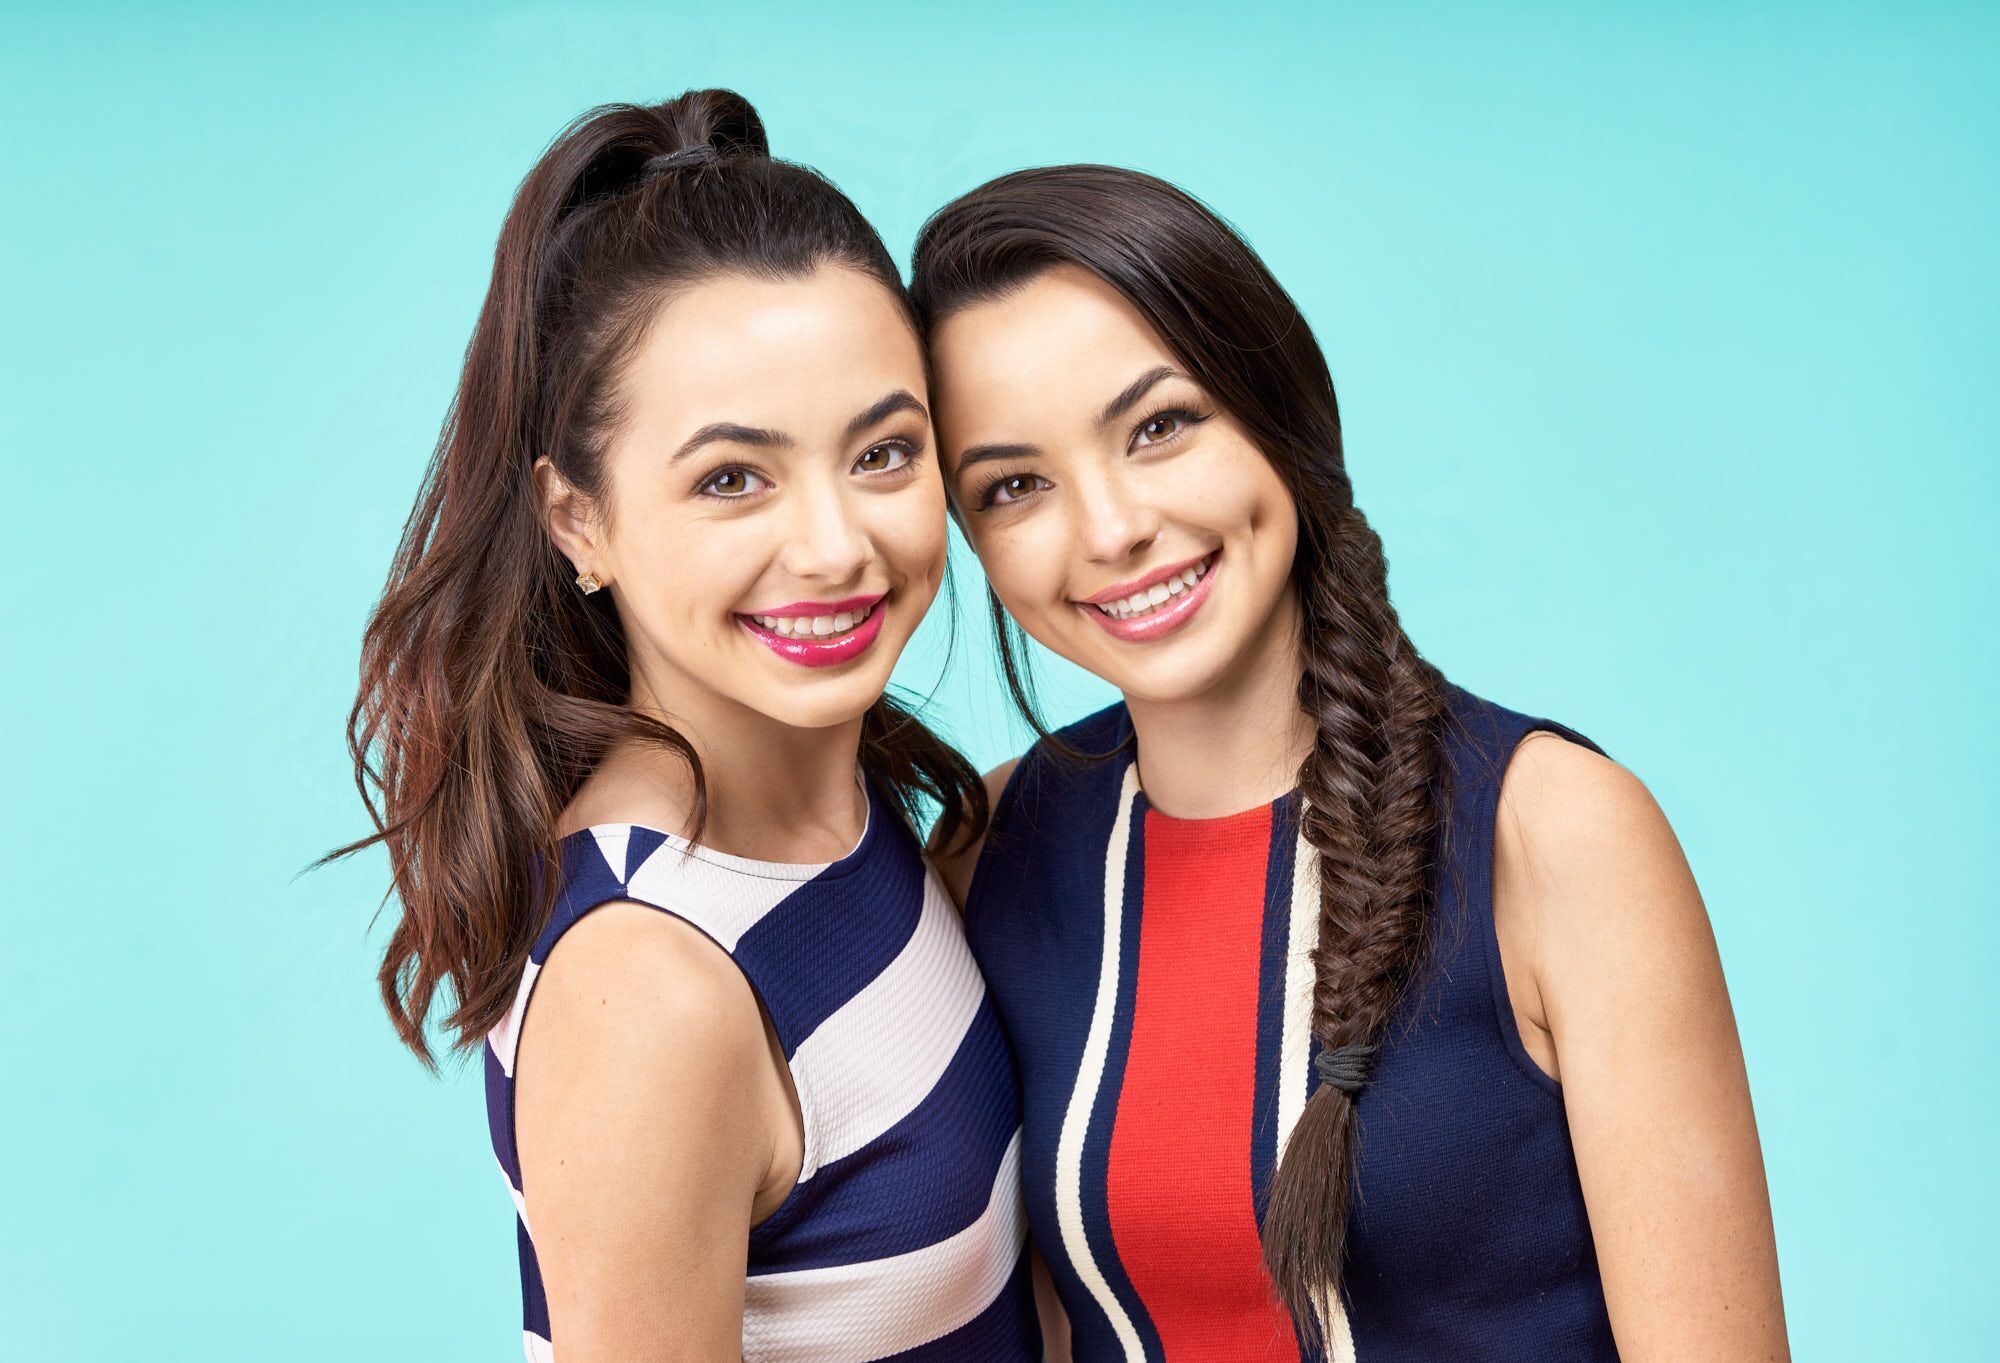 People 2000x1363 The Merrell Twins Vanessa Merrell Veronica Merrell women model simple background twins blue background two women ponytail braids sisters